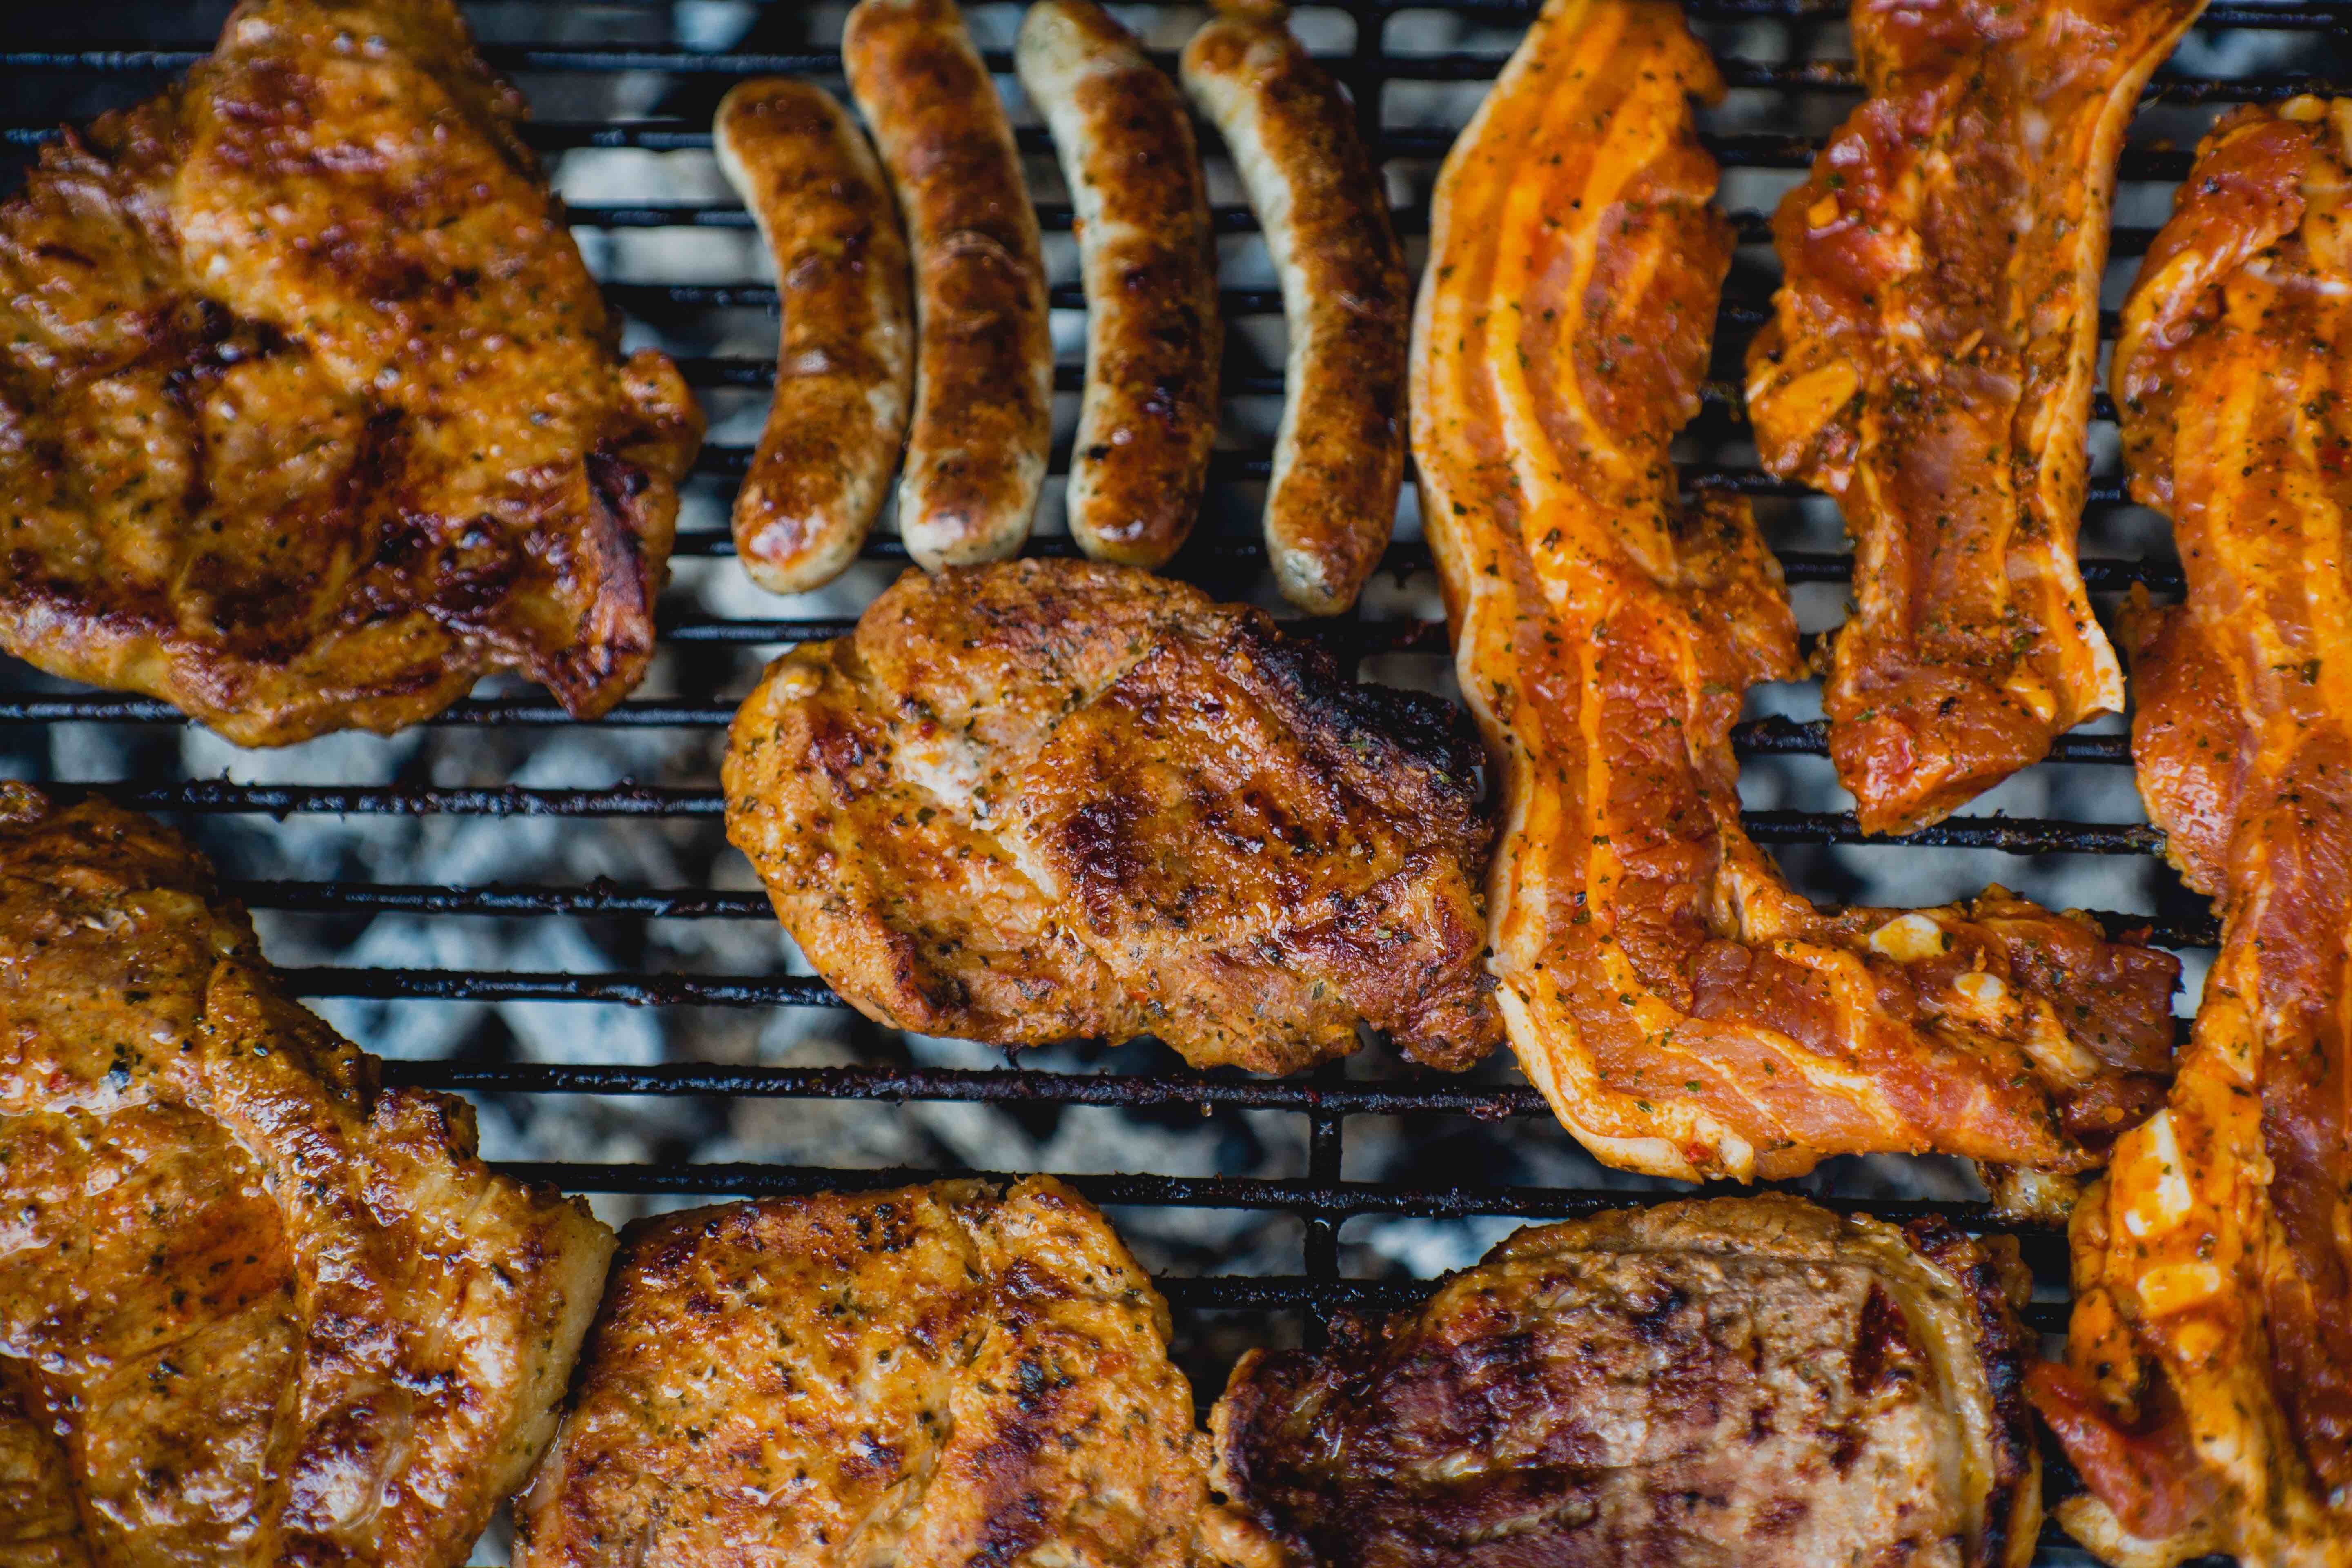 A variety of delicious, tender meat on the grill.